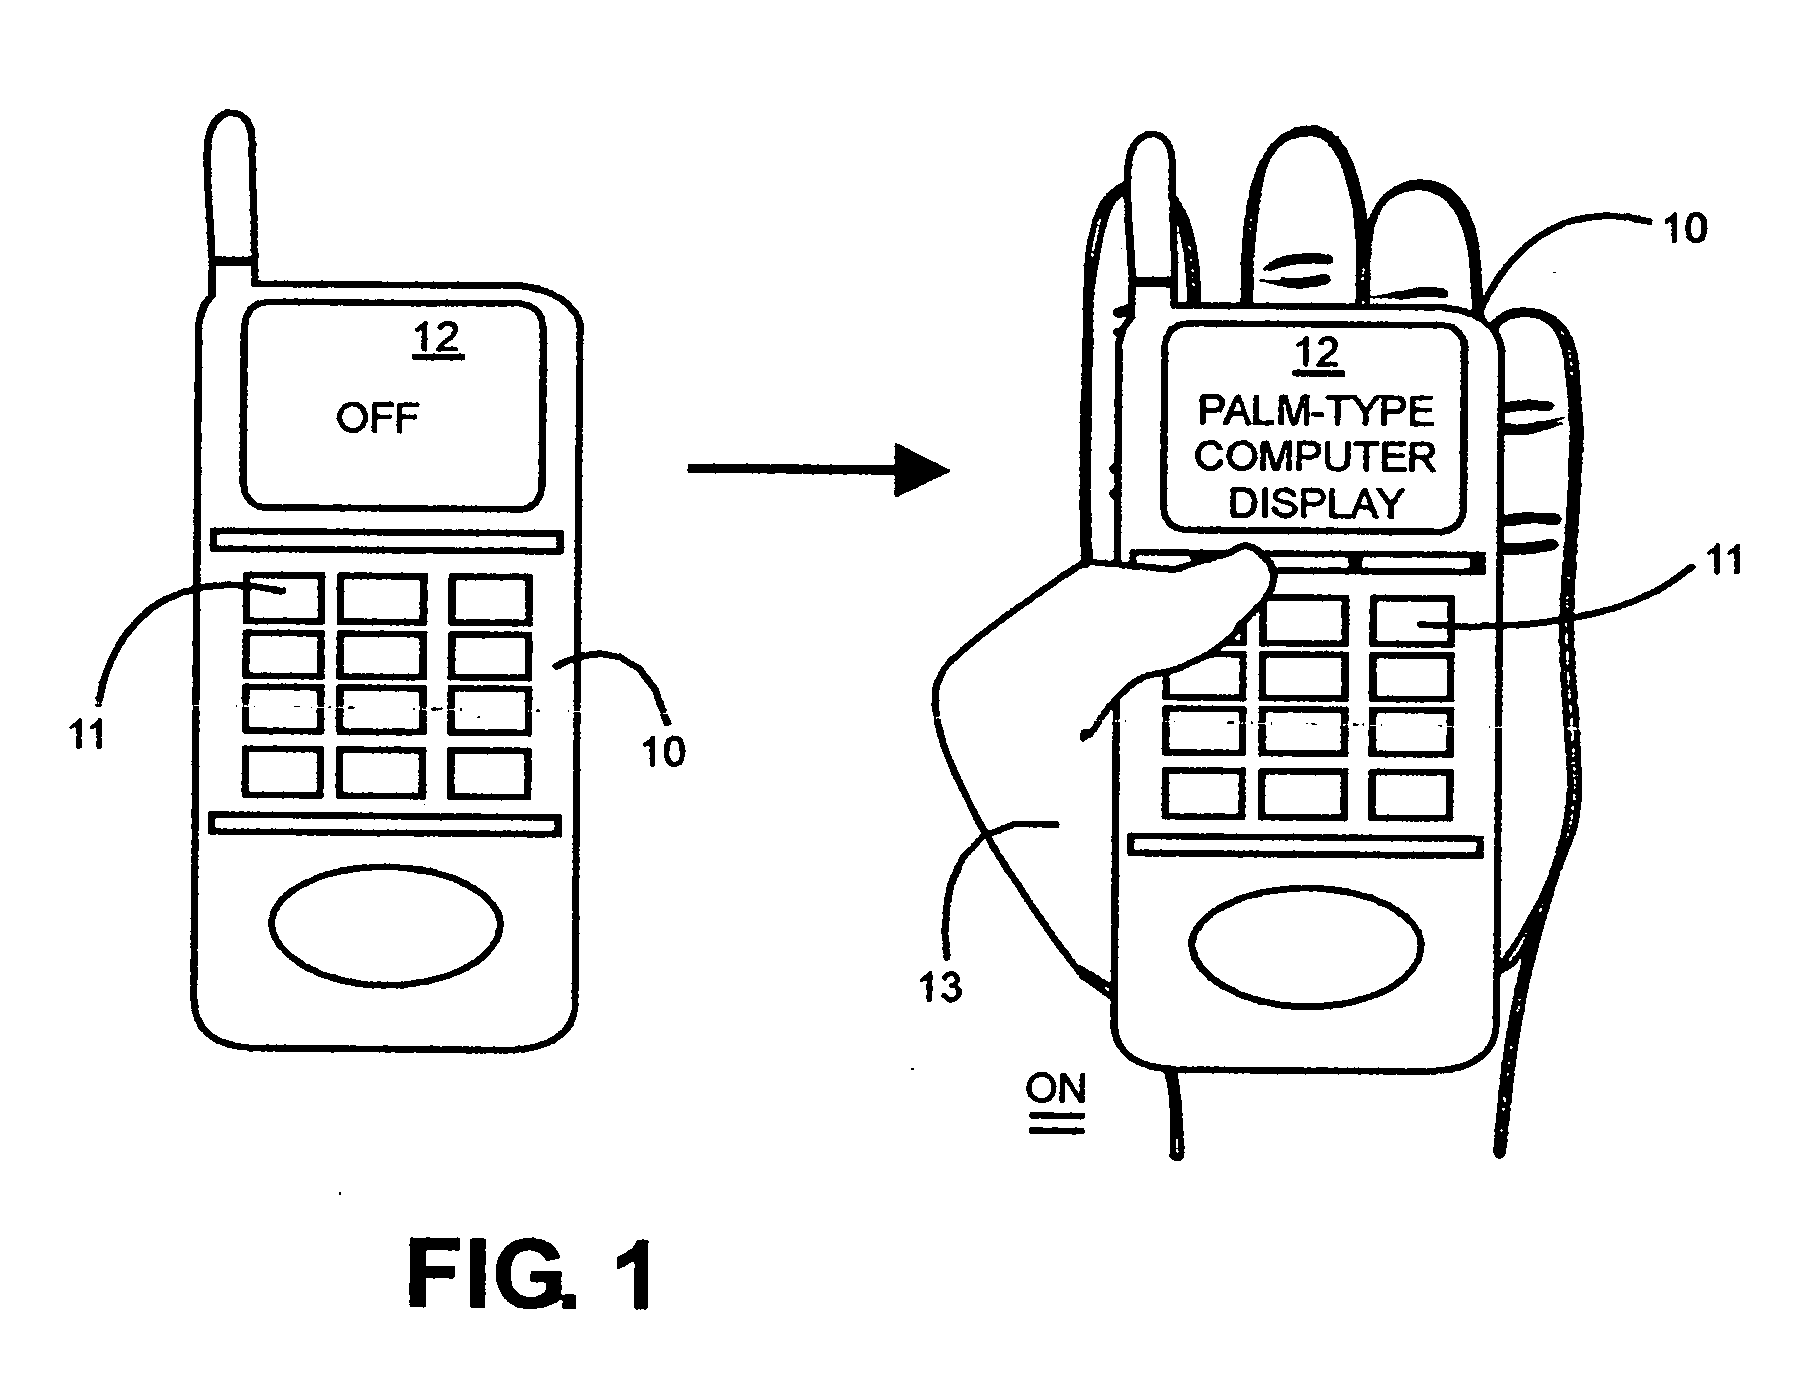 Preventing inadvertent striking of keys and like buttons in handheld palm-type devices when such devices are not in handheld usage